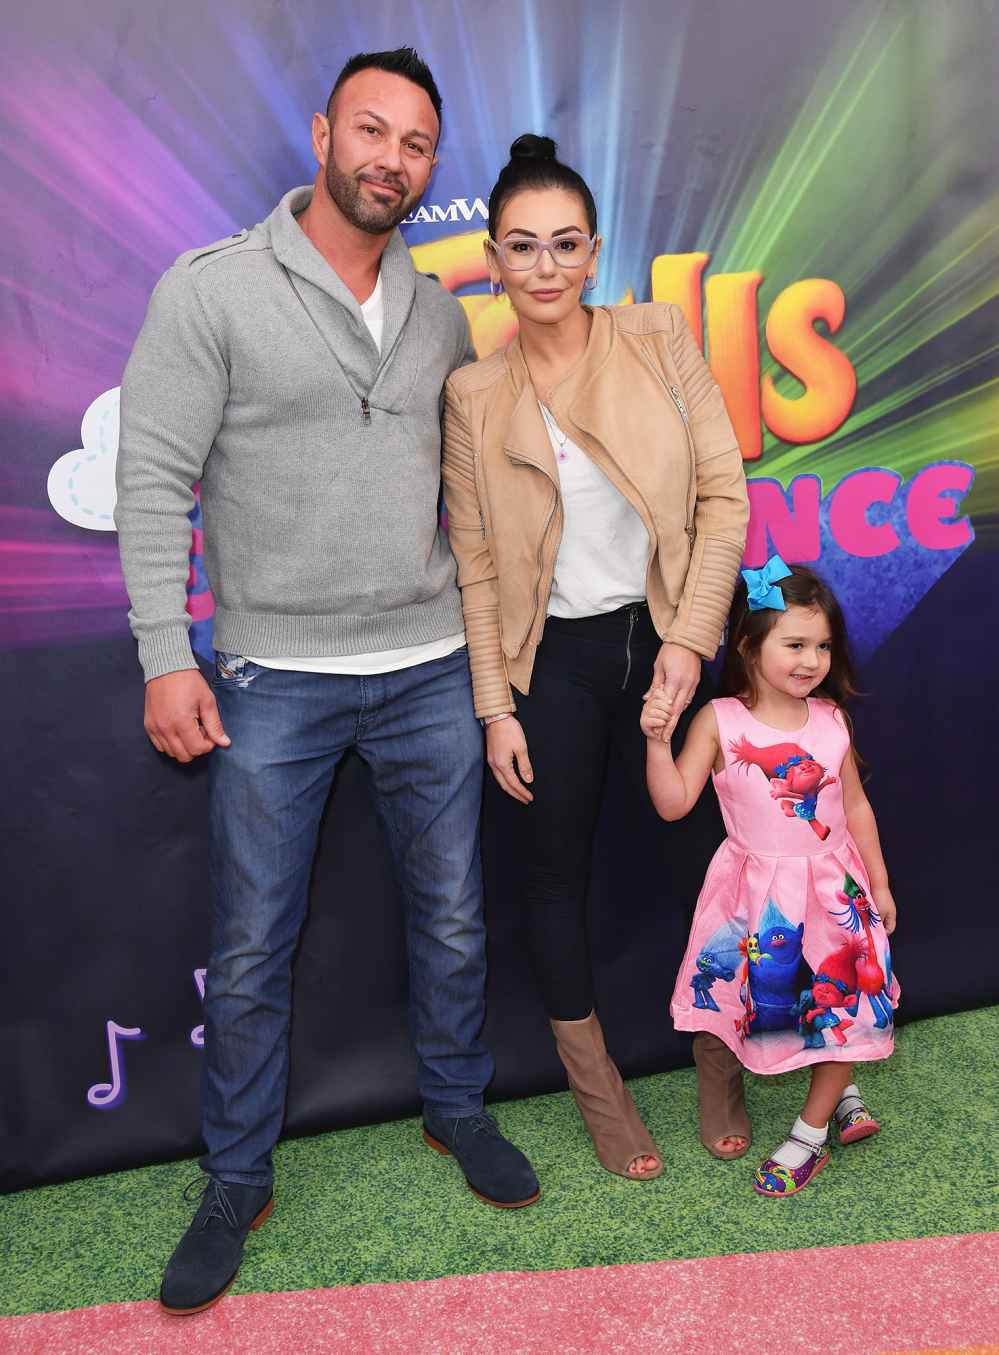 JWoww and Roger Mathews Reunite for Easter Train Ride With Kids